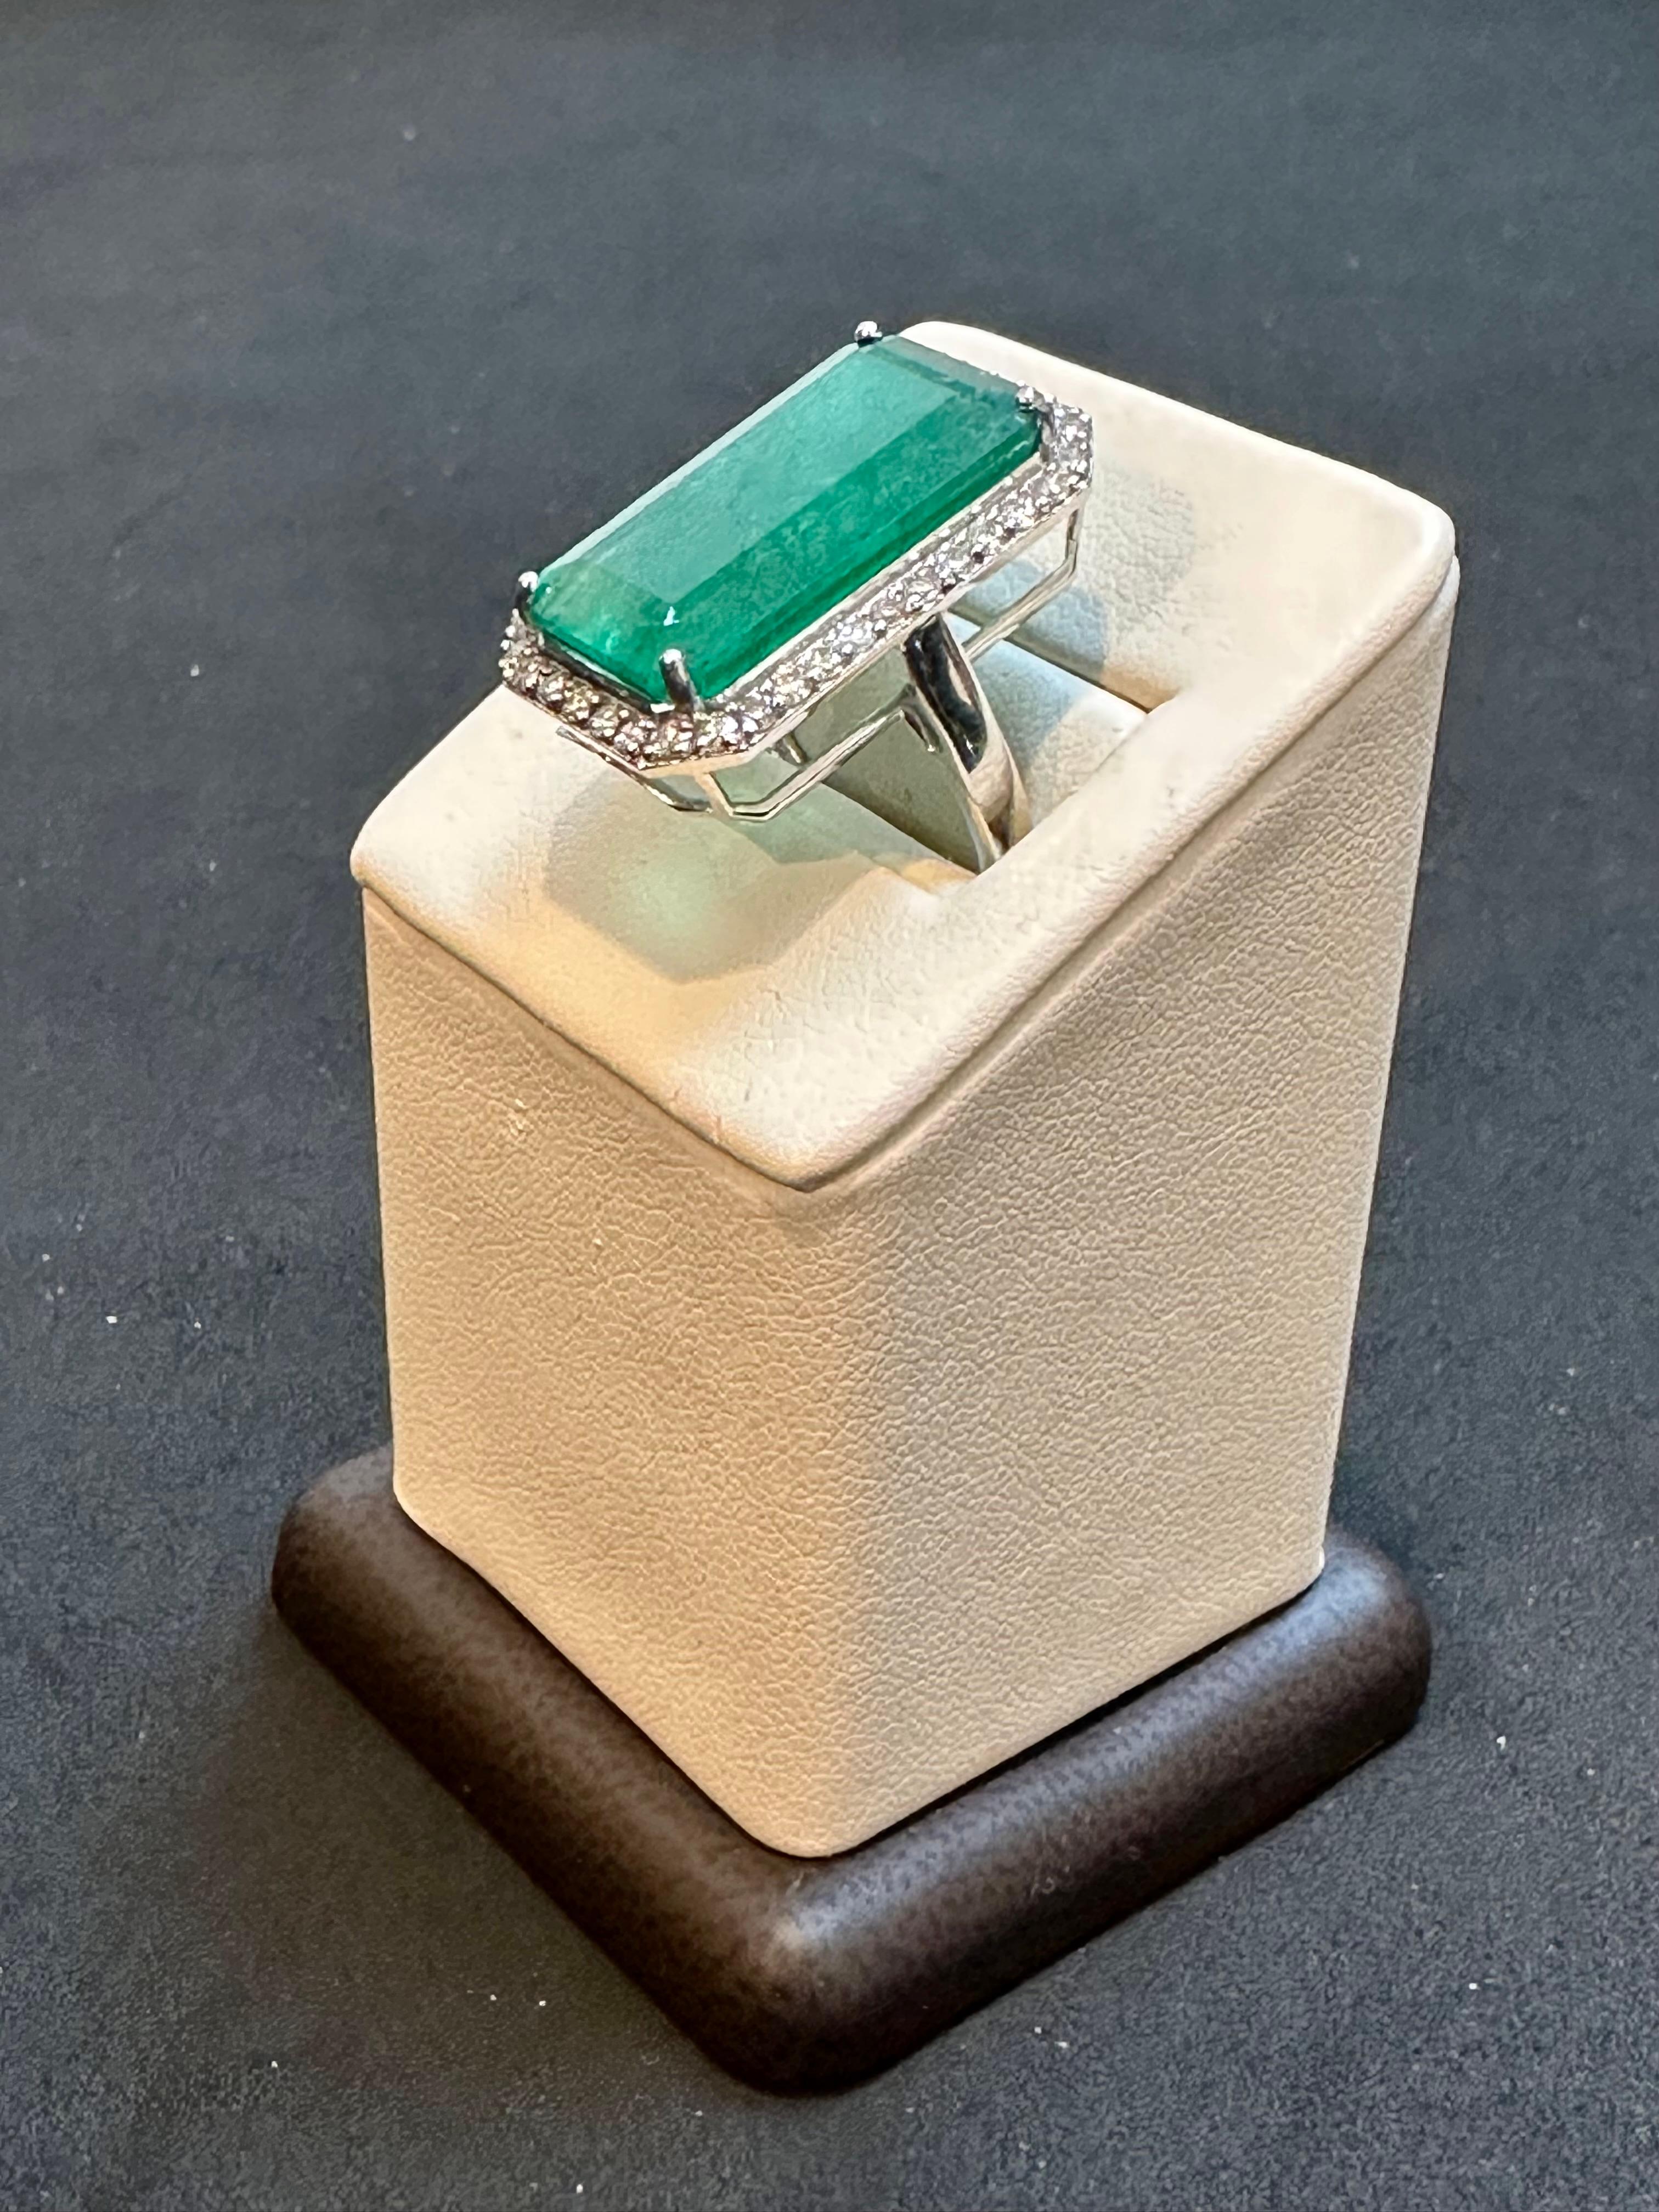 Natural 16 Carat Emerald Cut Zambian Emerald & Diamond Ring in 14kt White Gold In Excellent Condition For Sale In New York, NY